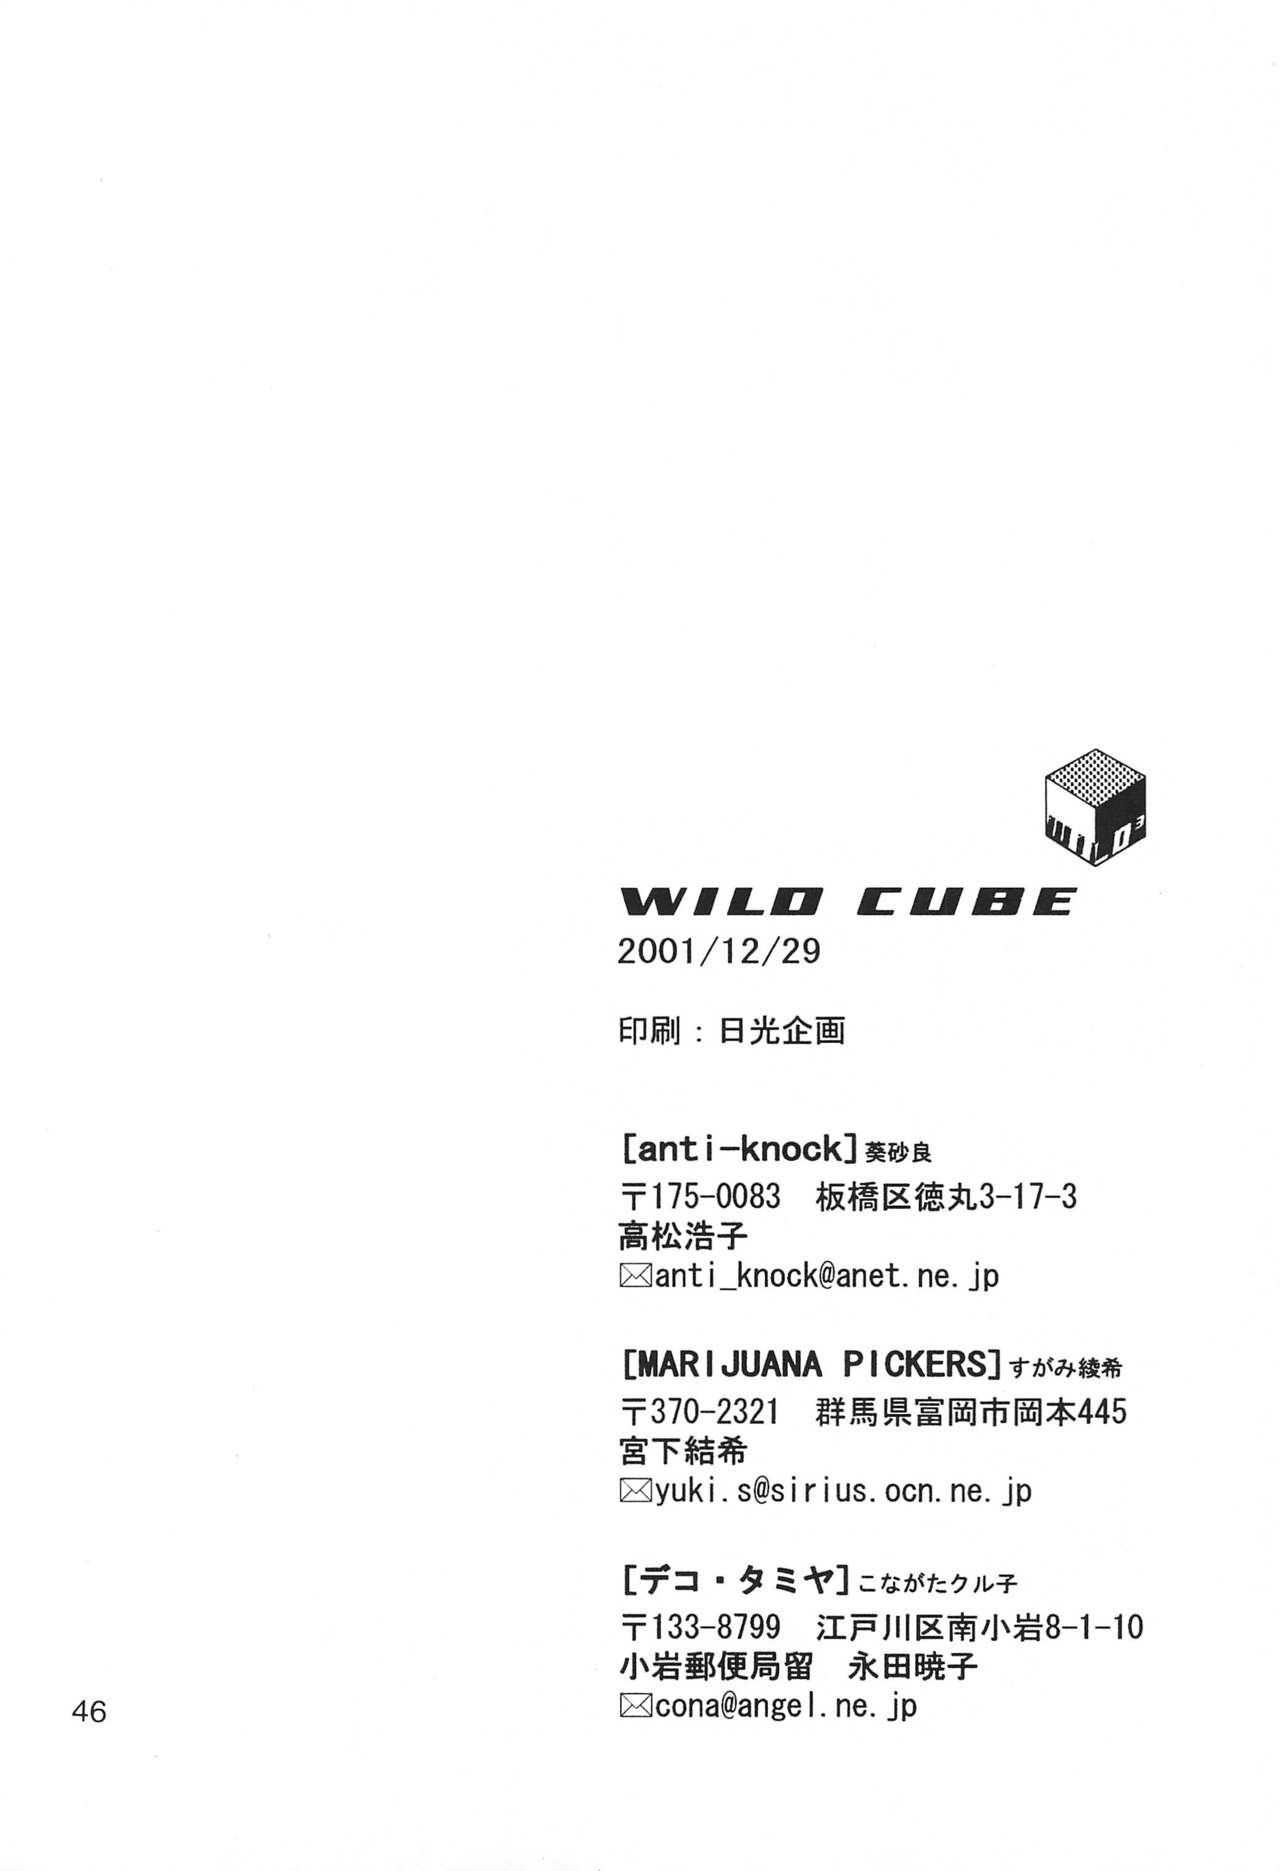 Shecock WILD CUBE - Digimon tamers Boy Girl - Page 46